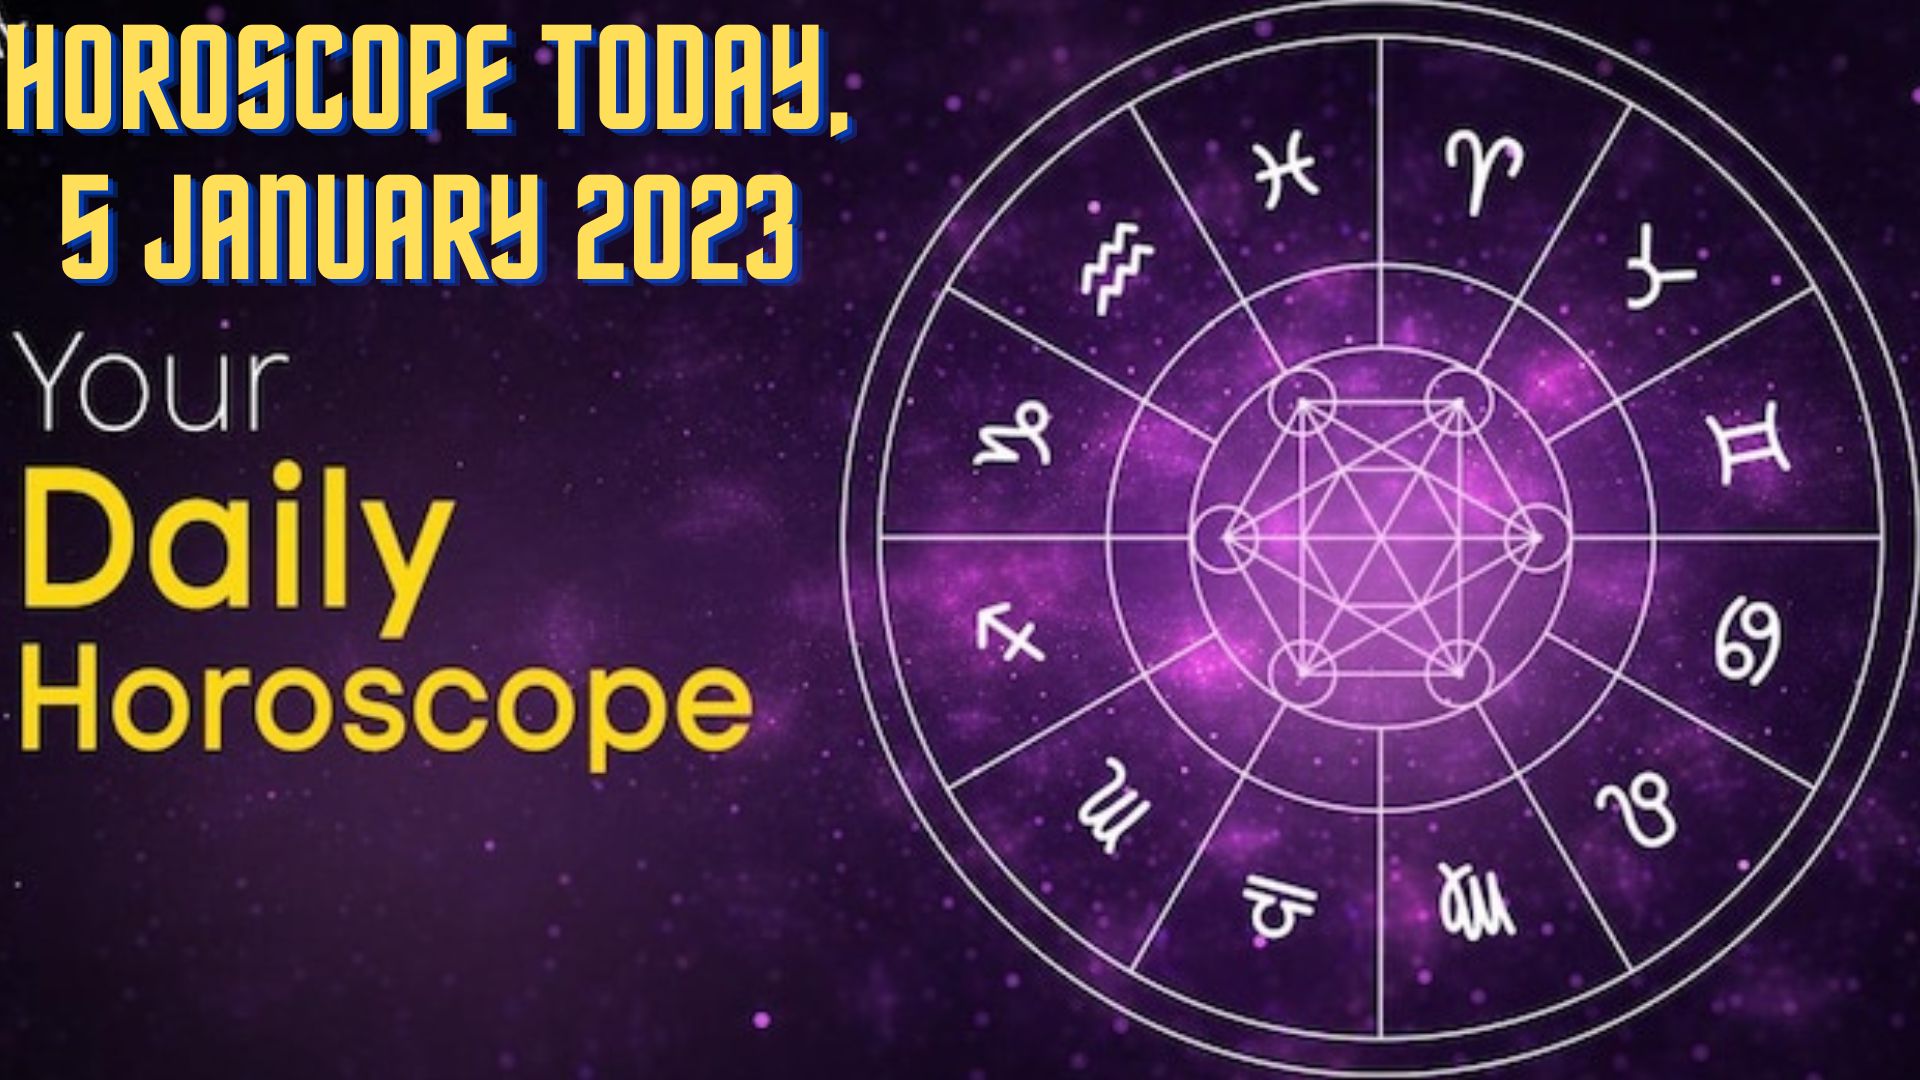 Horoscope Today, 5 January 2023 - Check Here Astrological Prediction For All Sun Signs